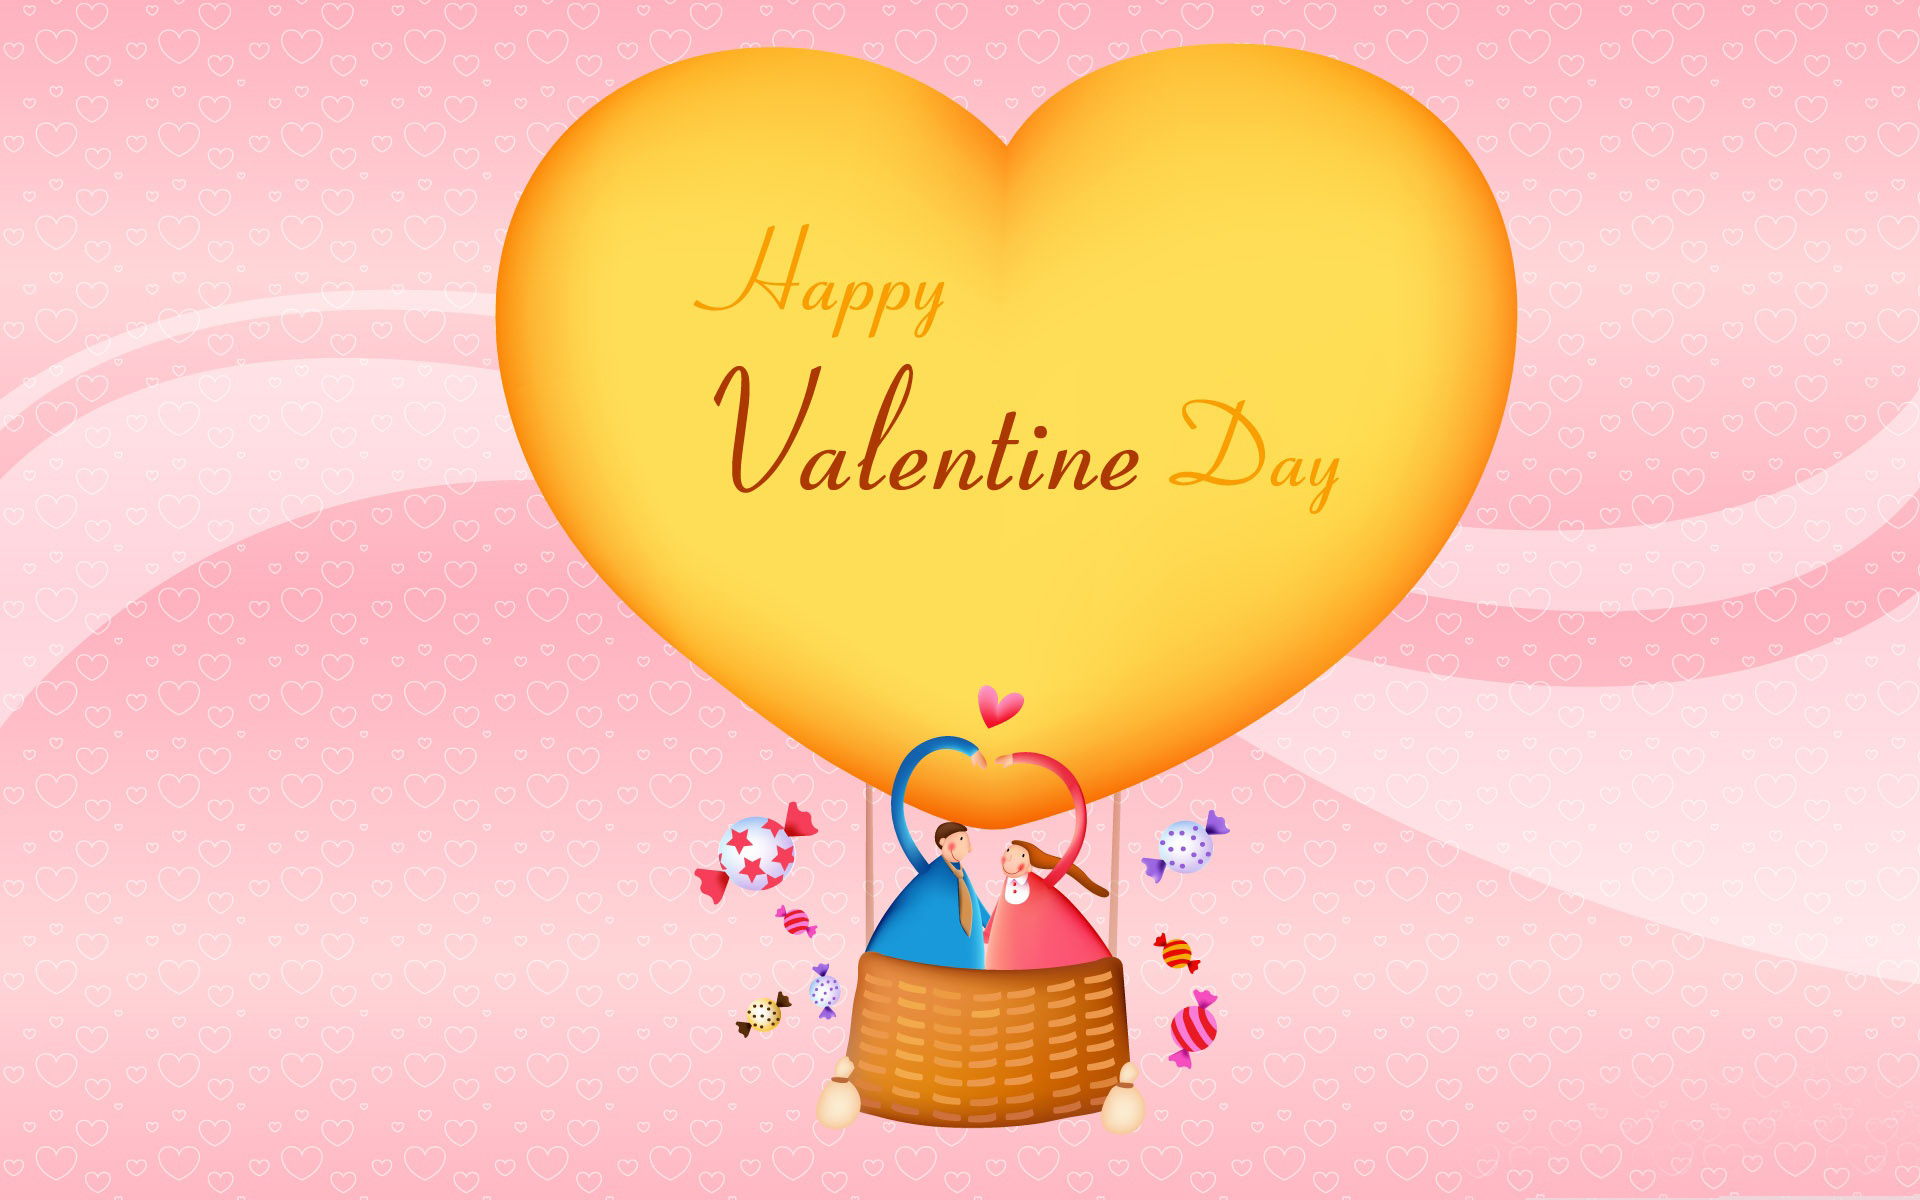 Valentines day Images HD Download For Whatsapp Facebook Husband| Happy Valentines  Day Images With Quotes for Him Her